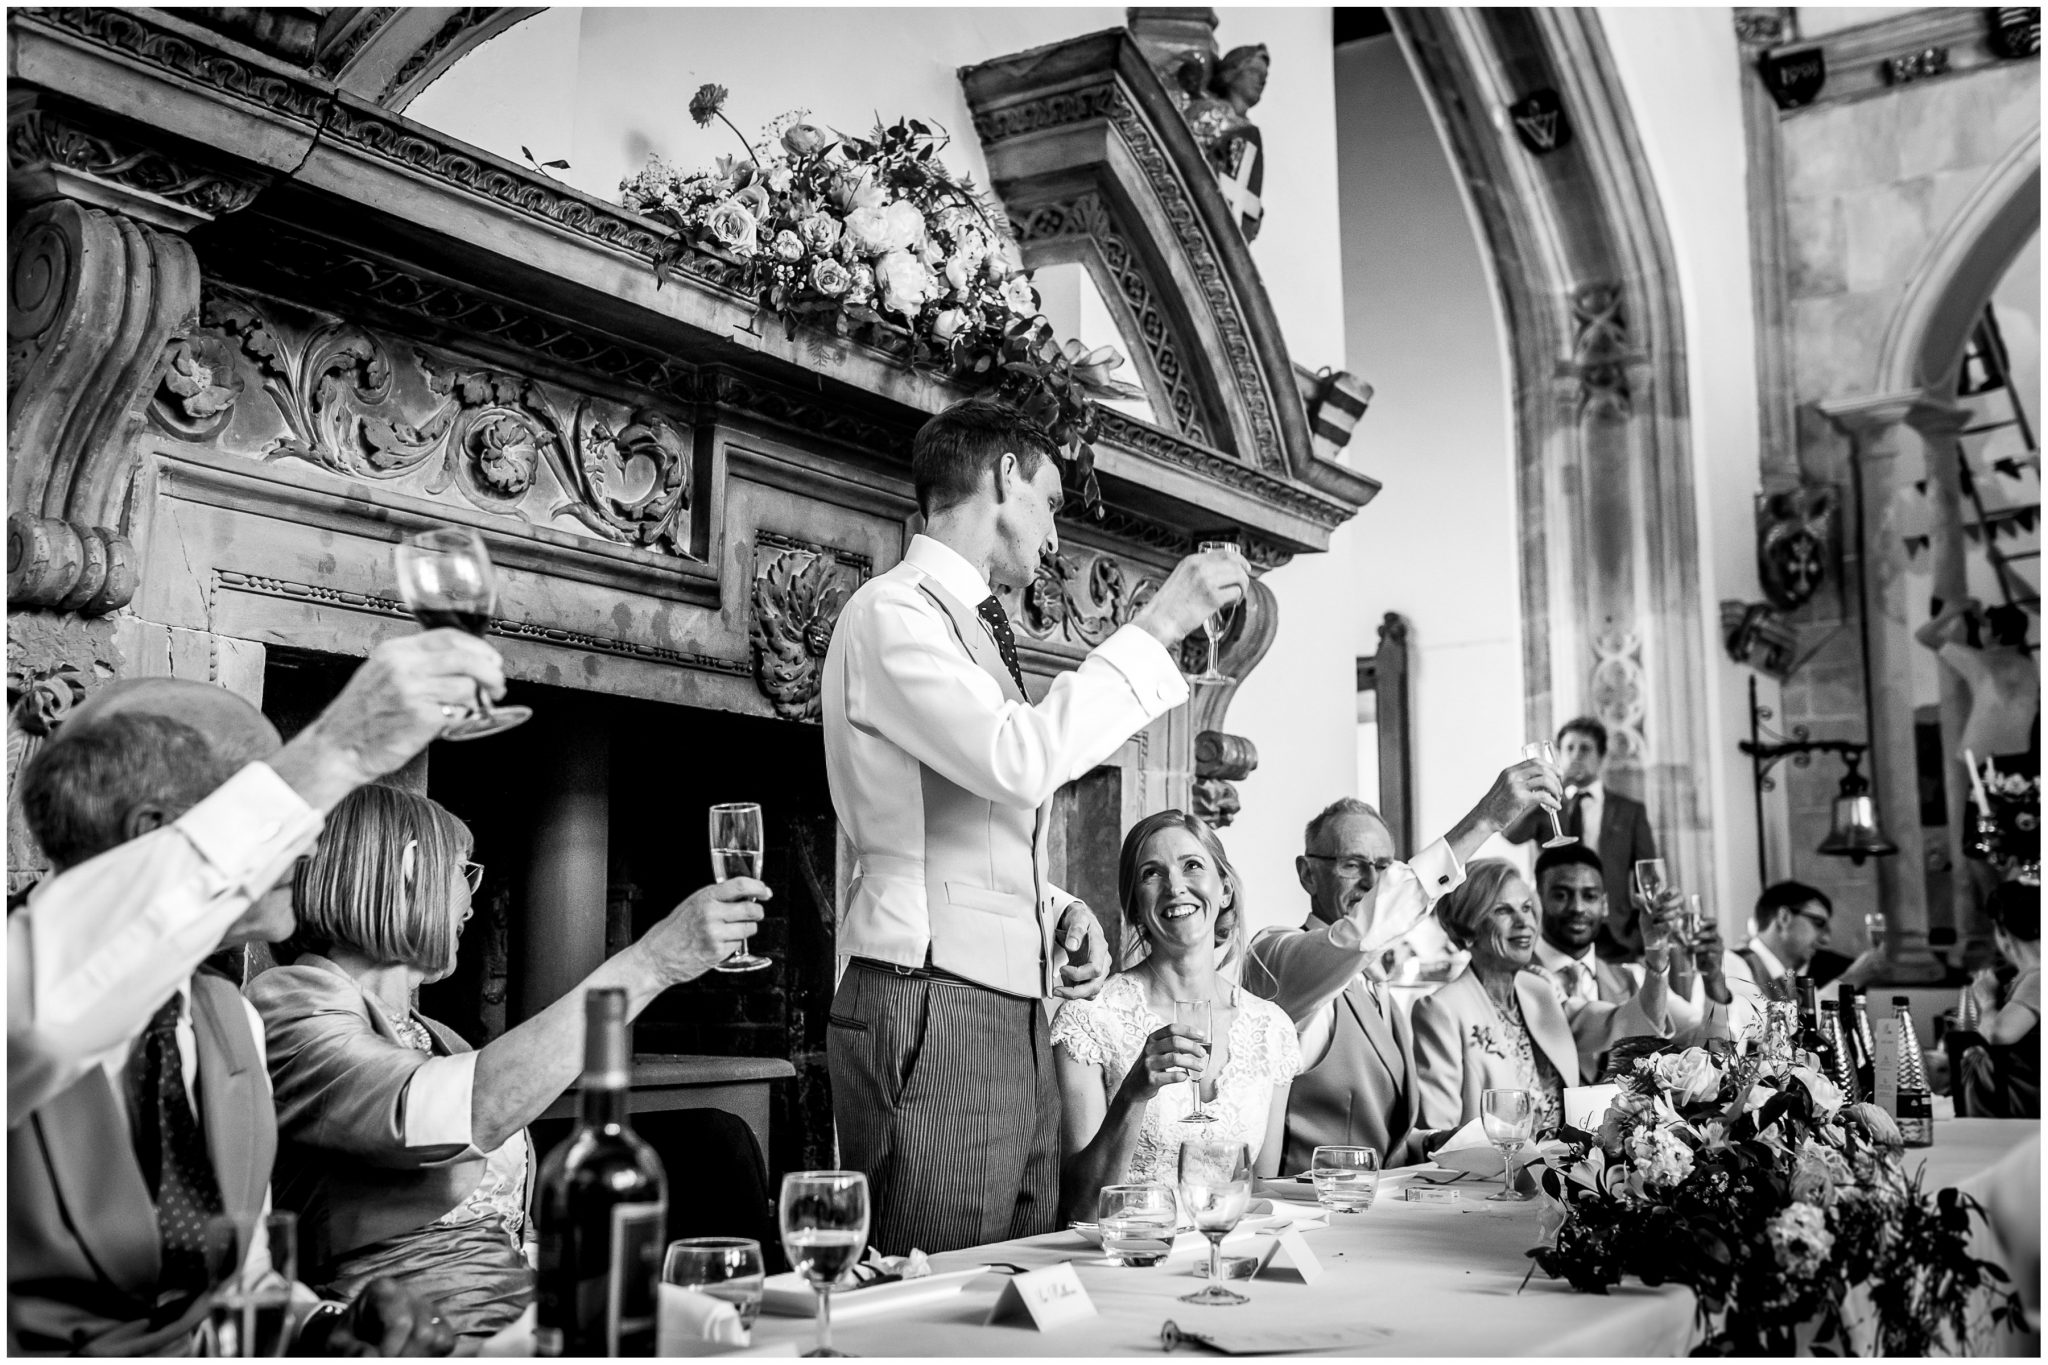 The groom raises a glass for a toast during his wedding speech